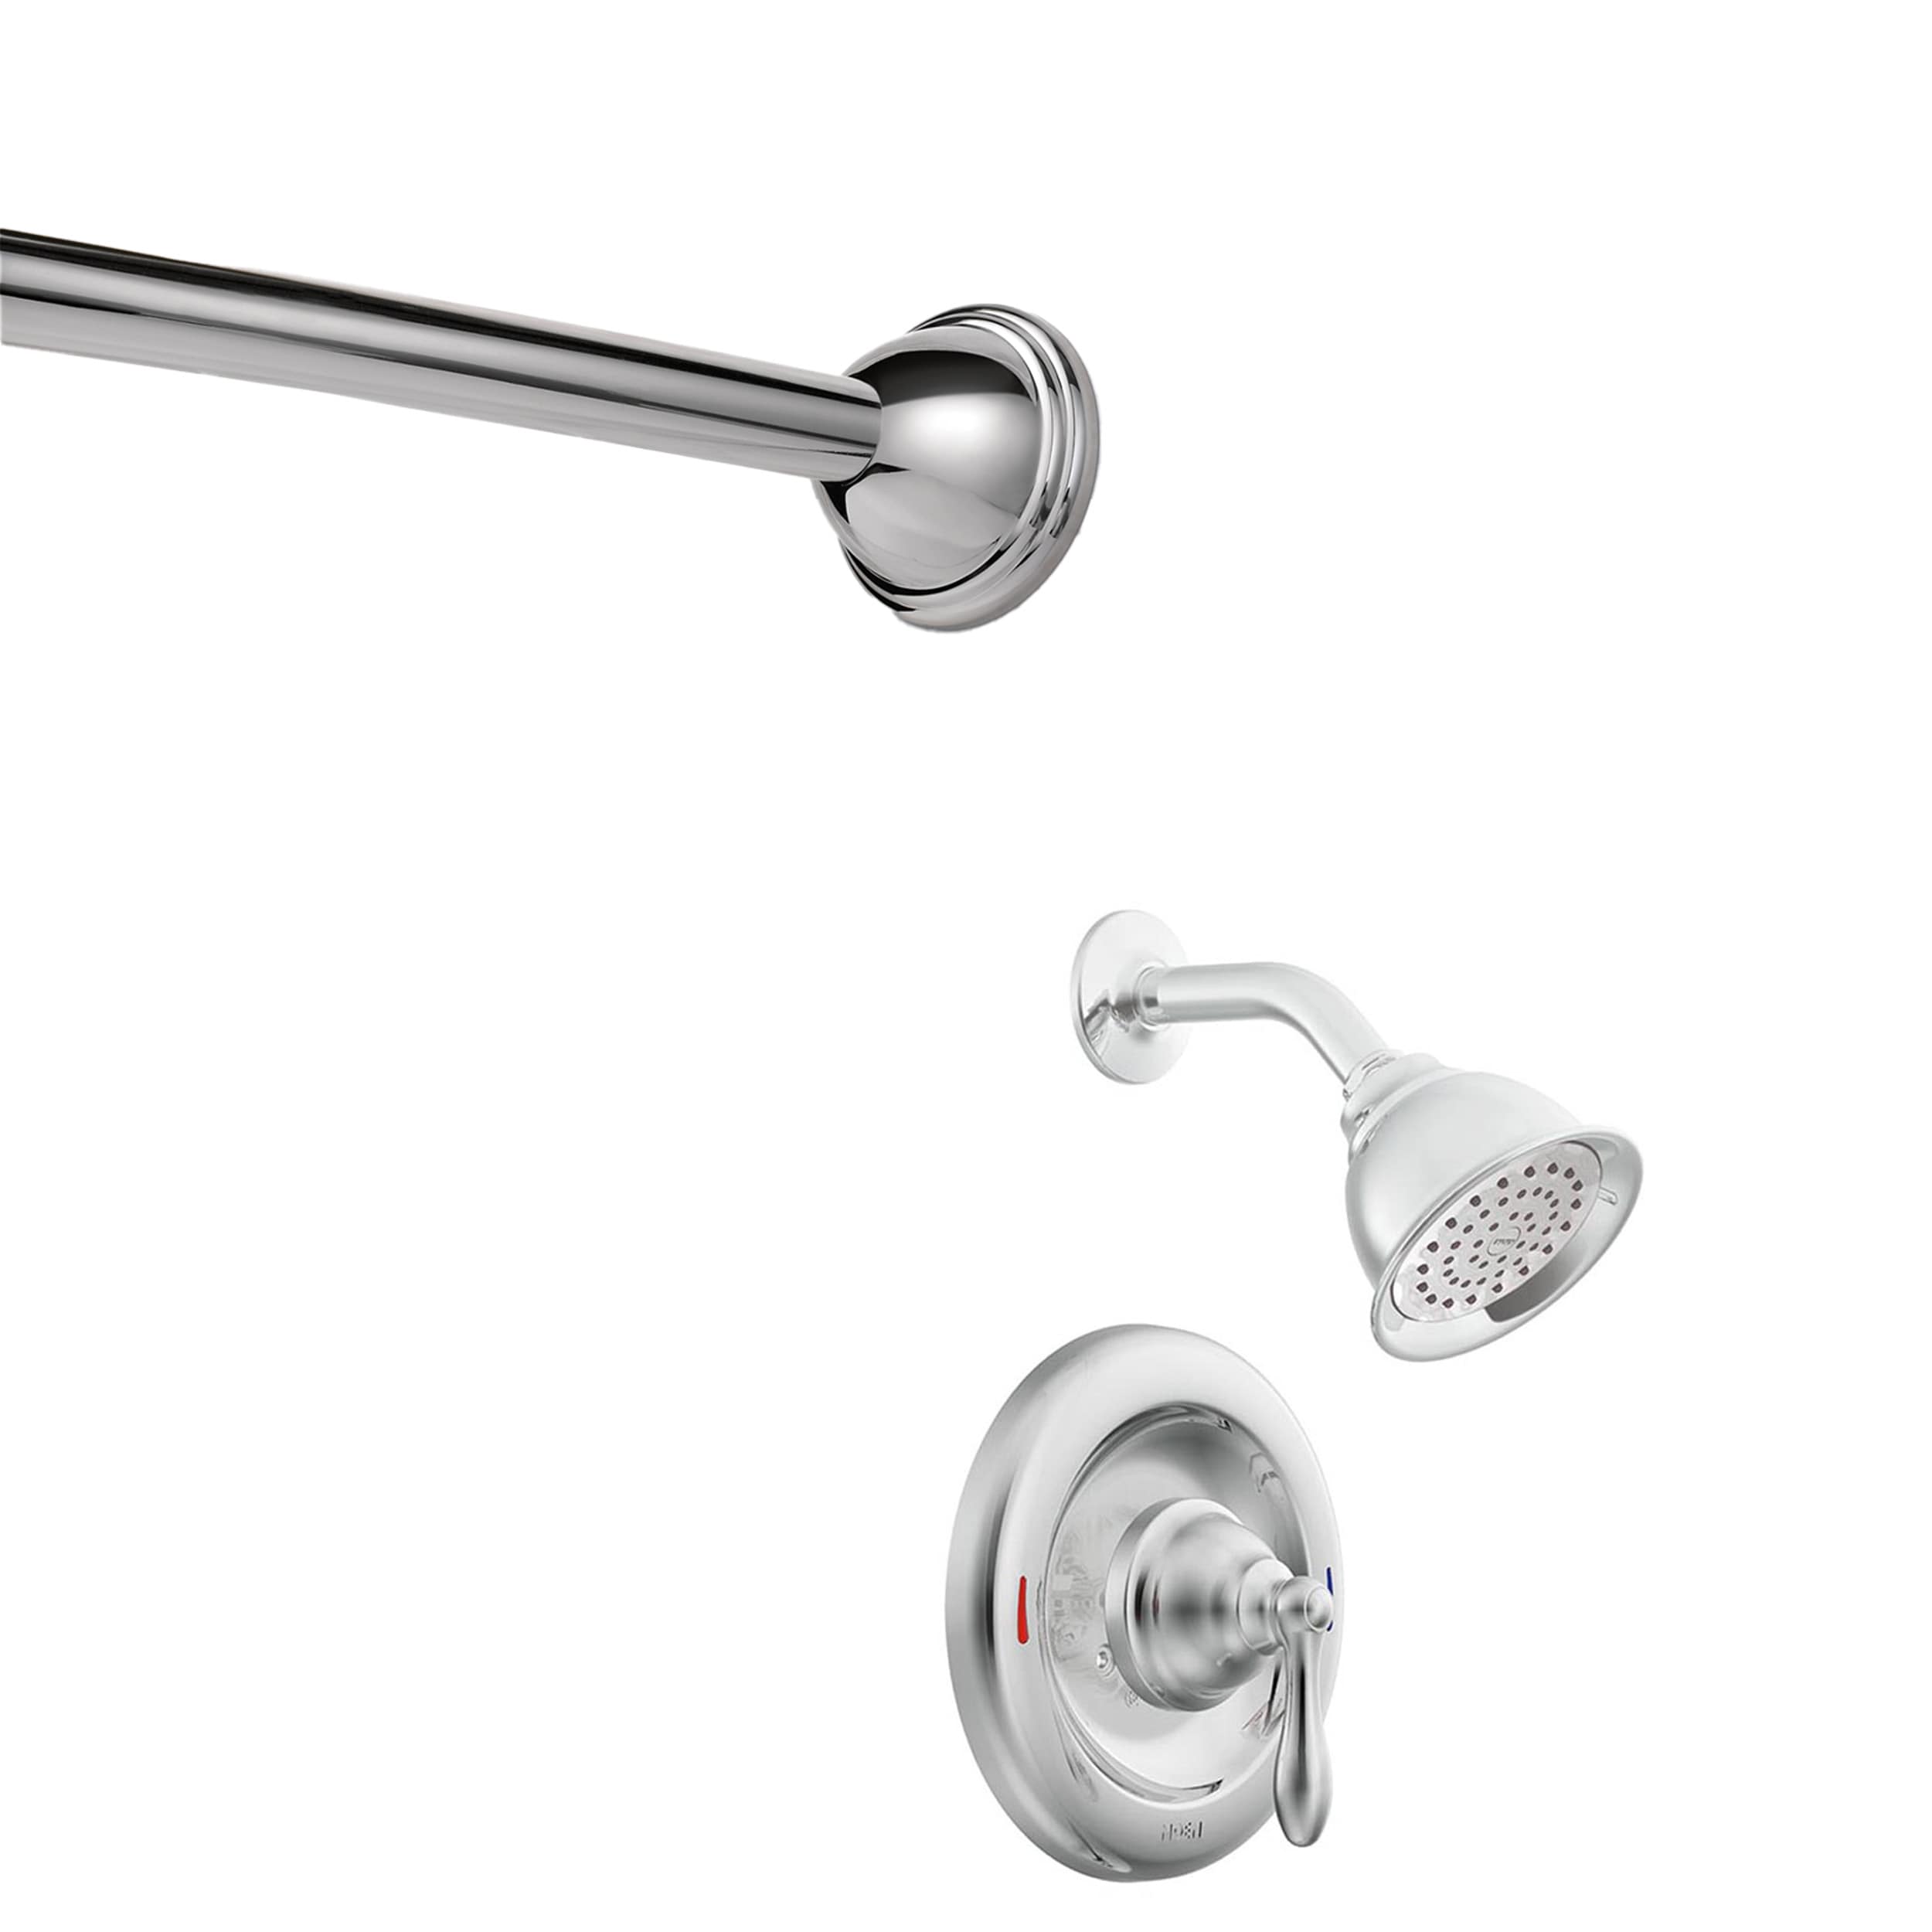 Moen Caldwell Chrome Tub Shower Trim (Valve Included) with Shower Rod